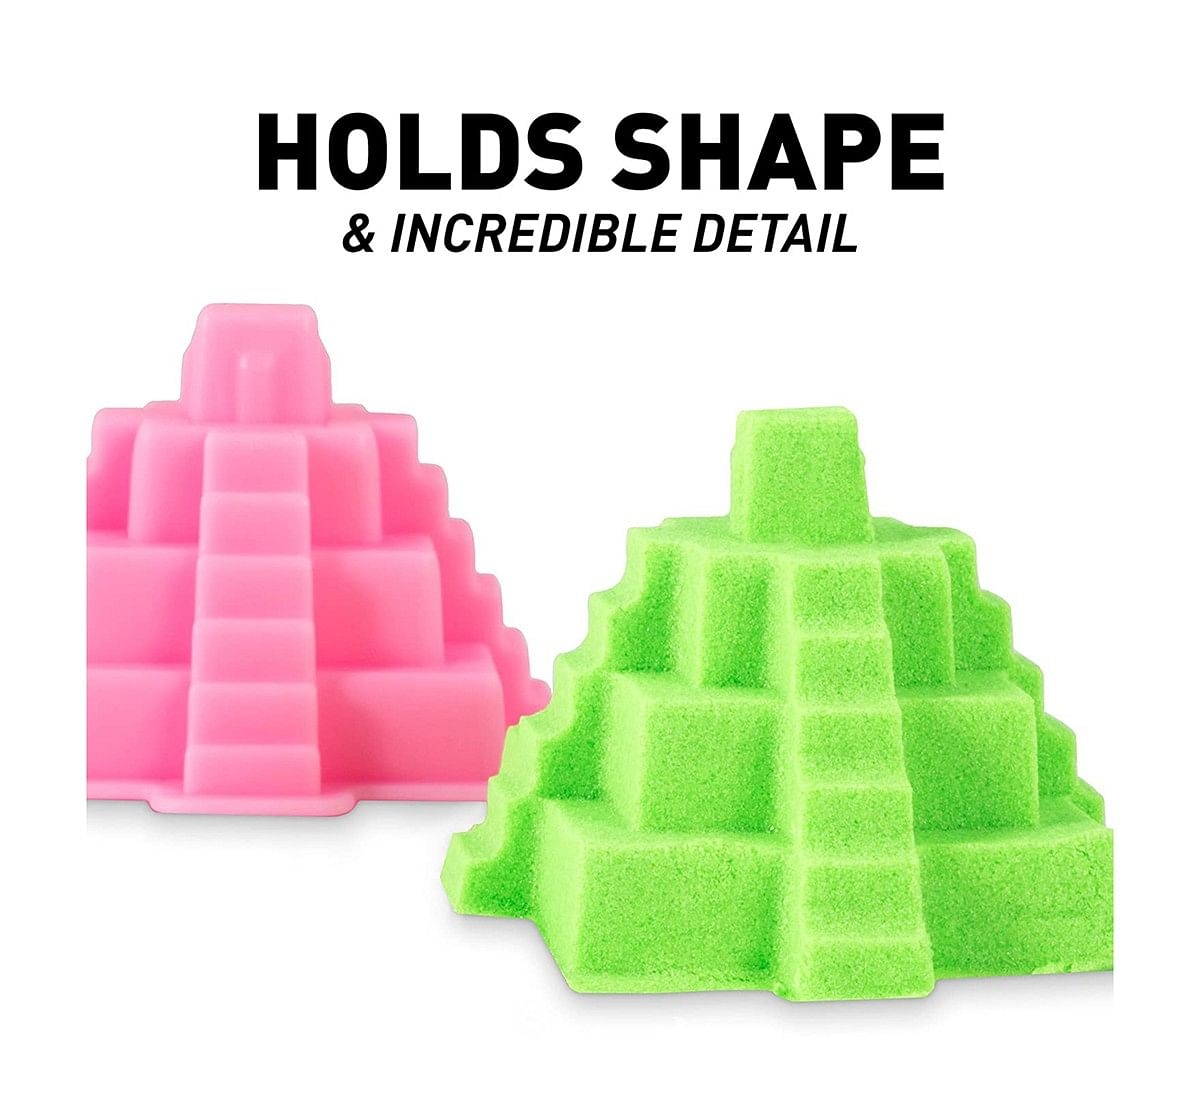 National Geographic 2 Lbs of Glow-In-The-Dark Sand with Castle Moulds and Tray for Kids age 3Y+ 